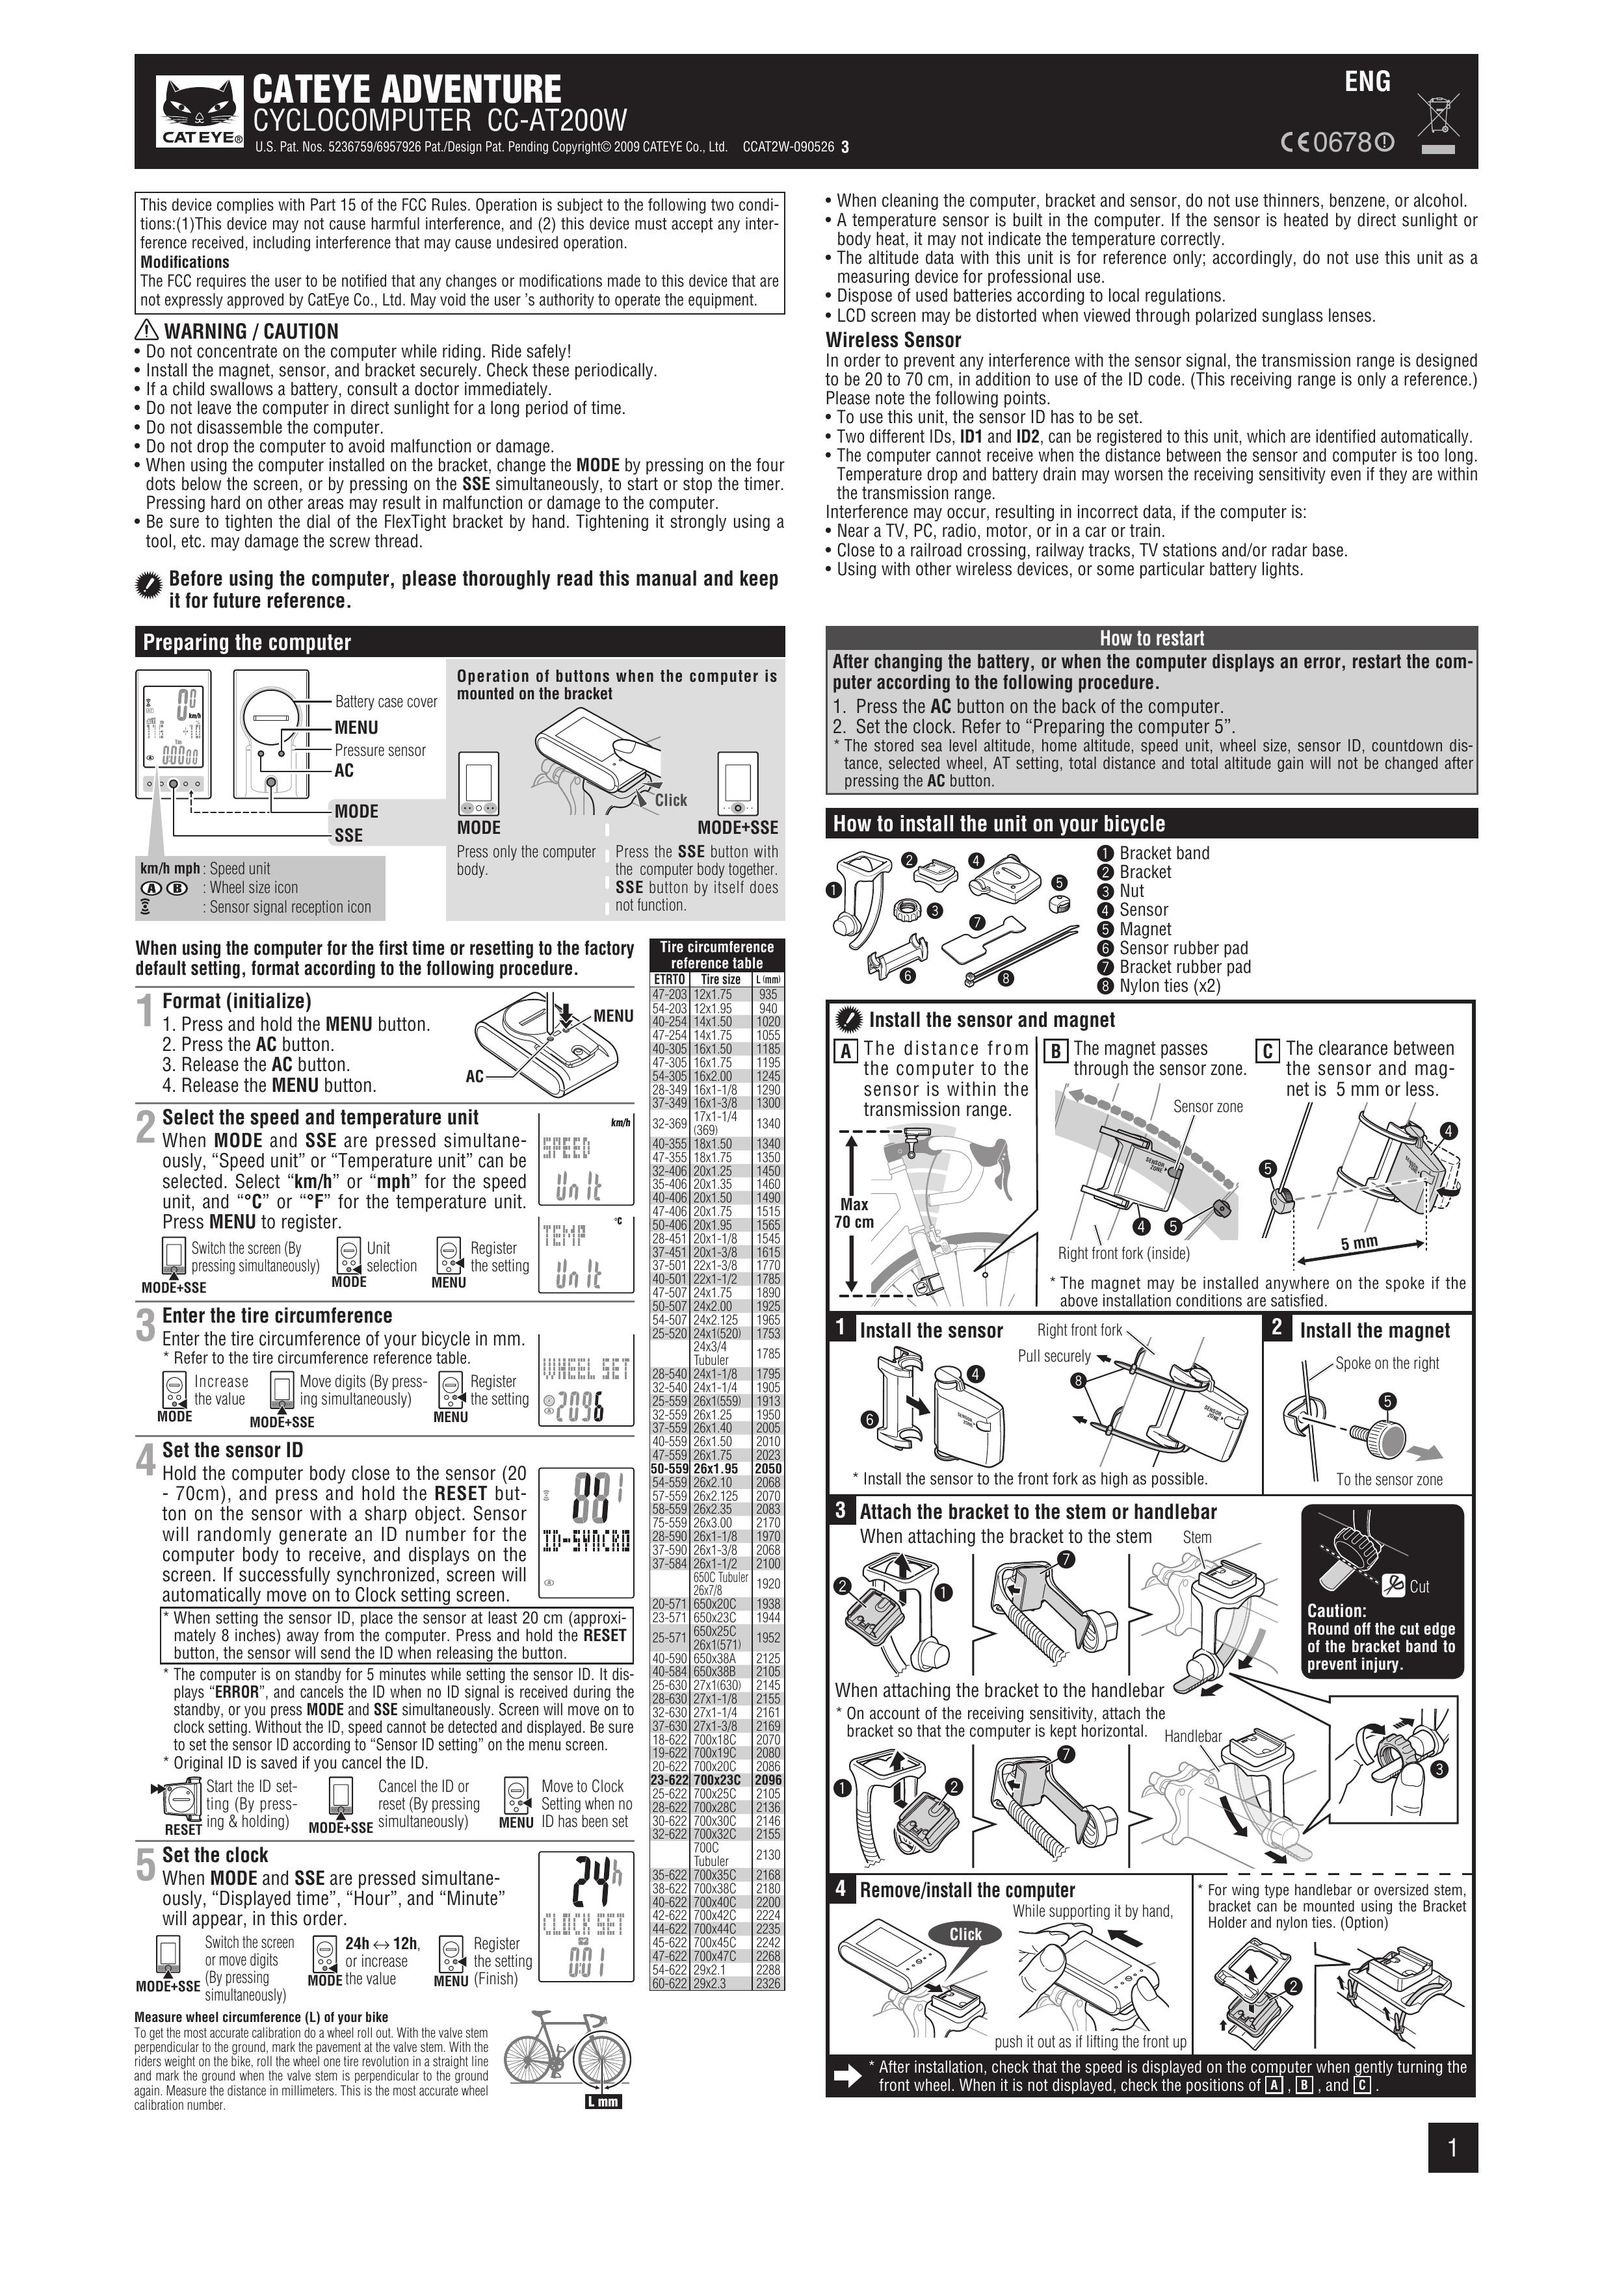 Cateye CC-AT200W Bicycle Accessories User Manual